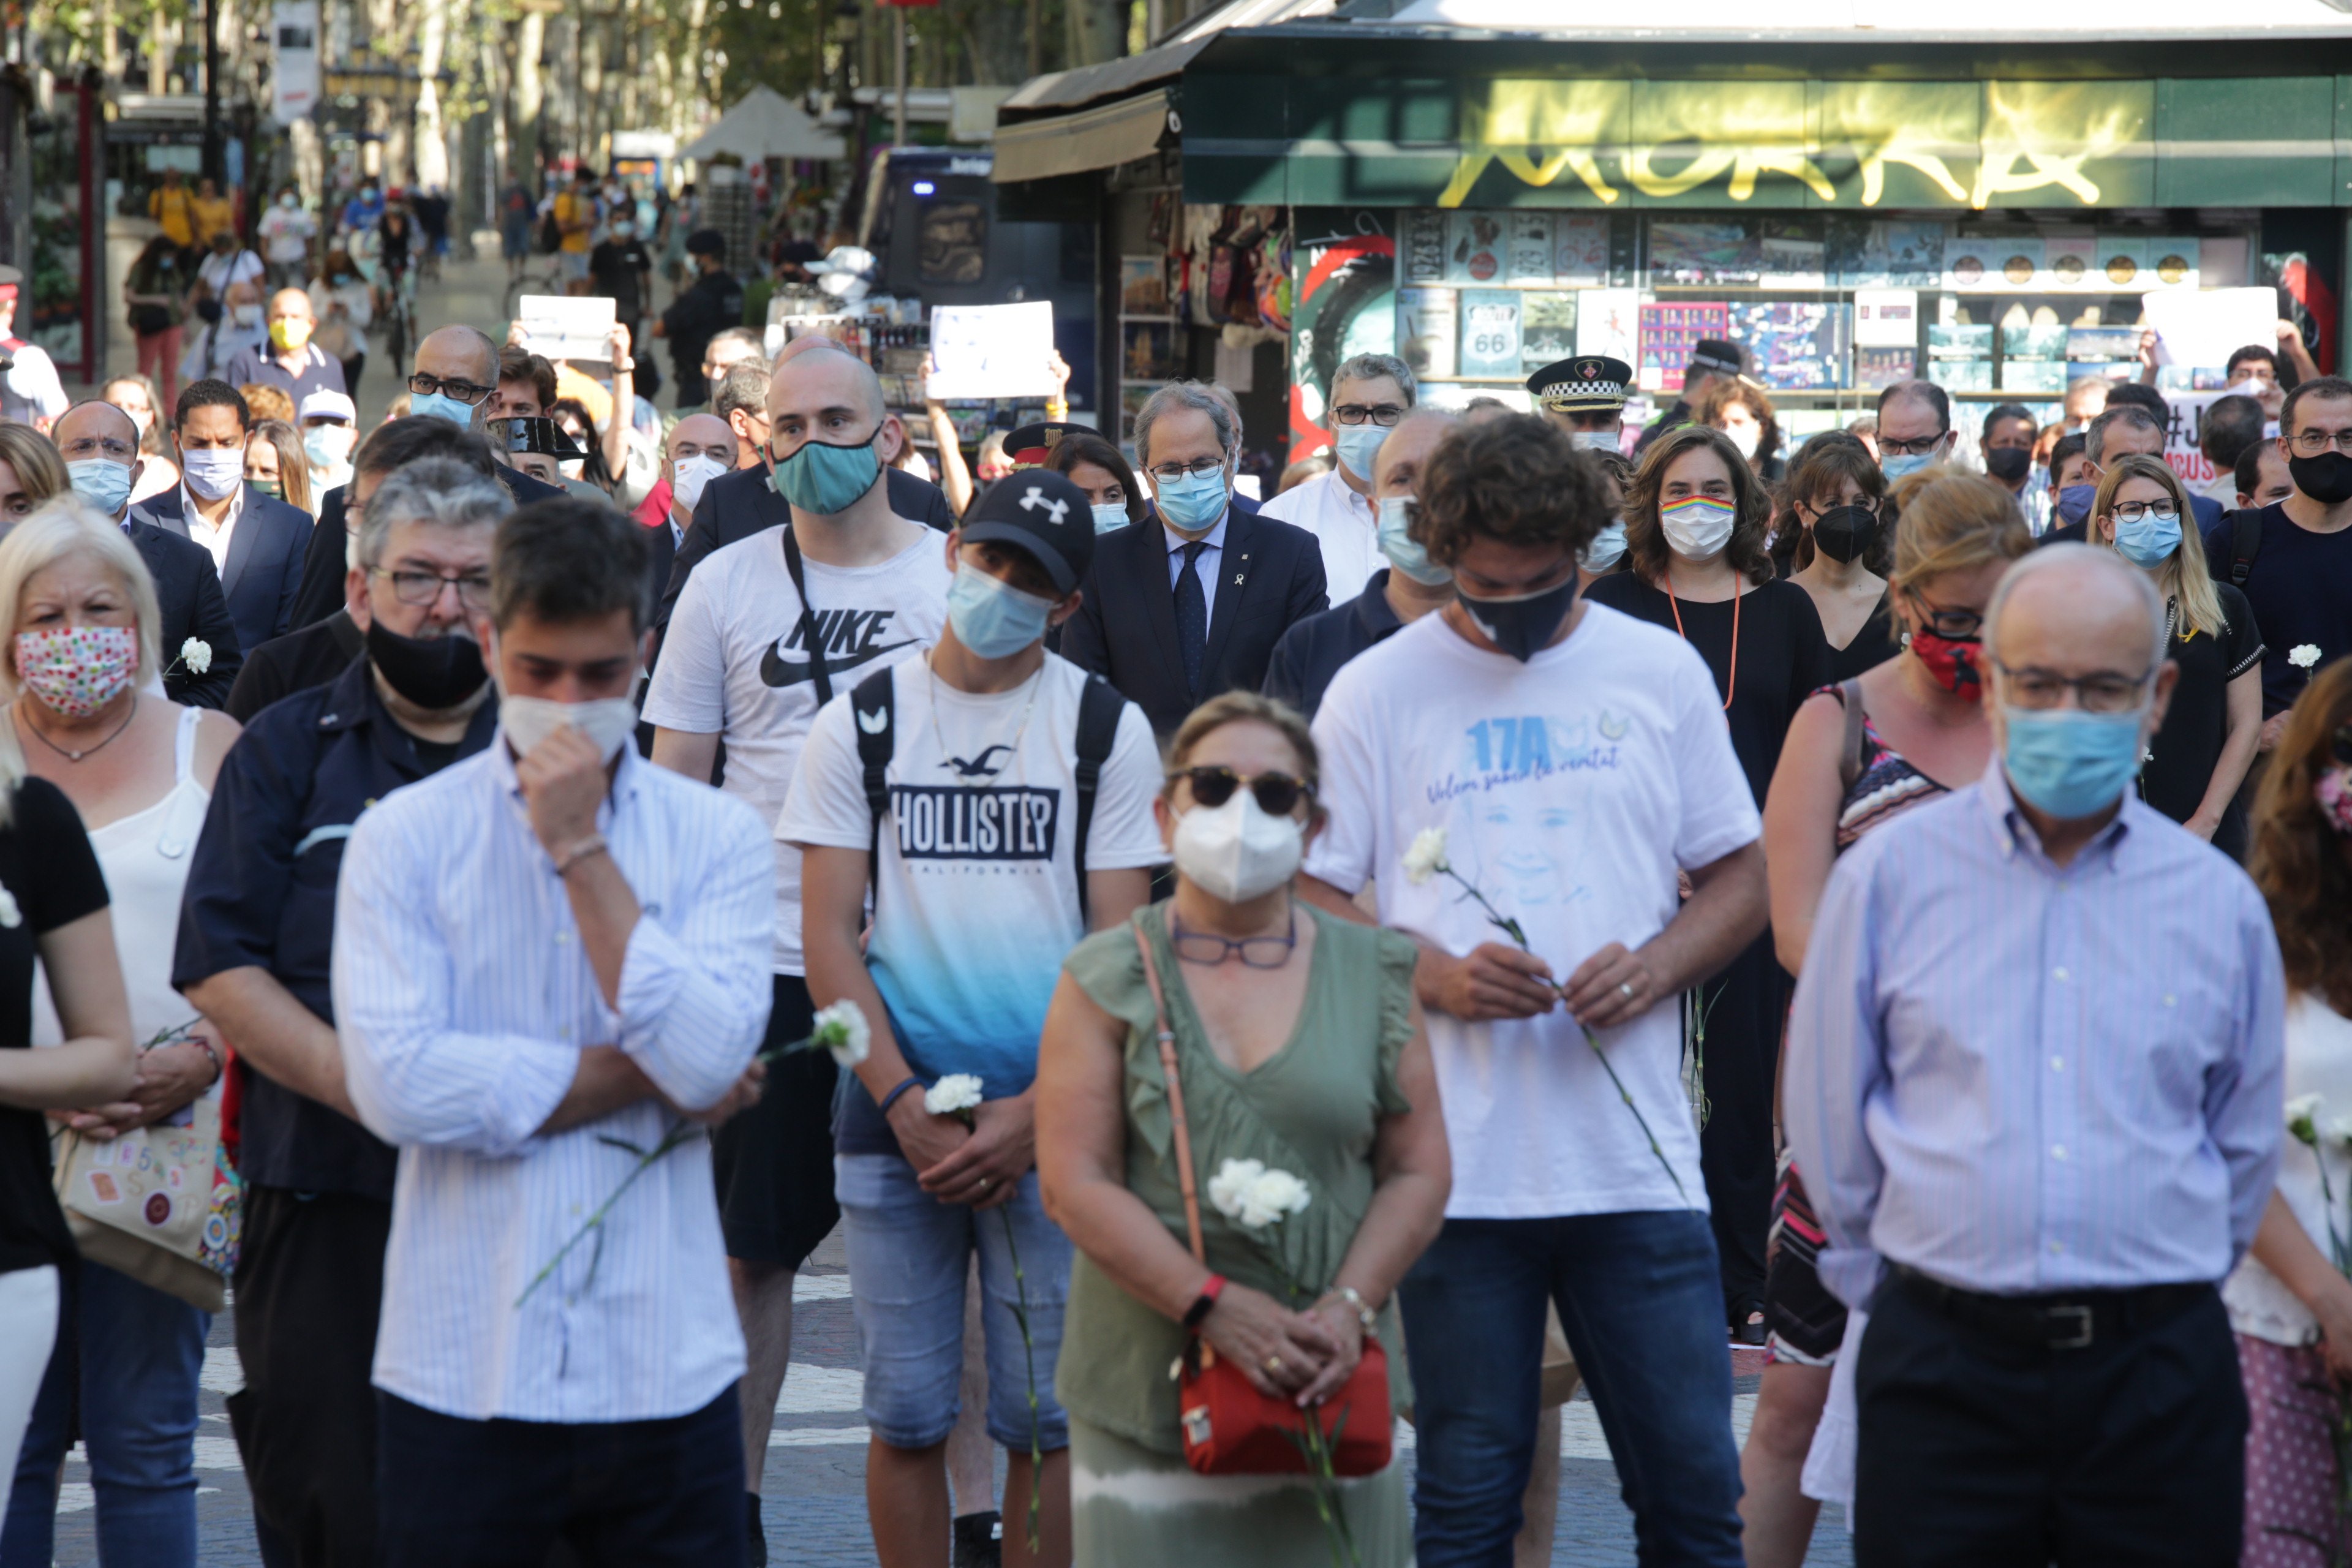 Homage held to terror victims on Barcelona's Rambla as new campaign demands truth